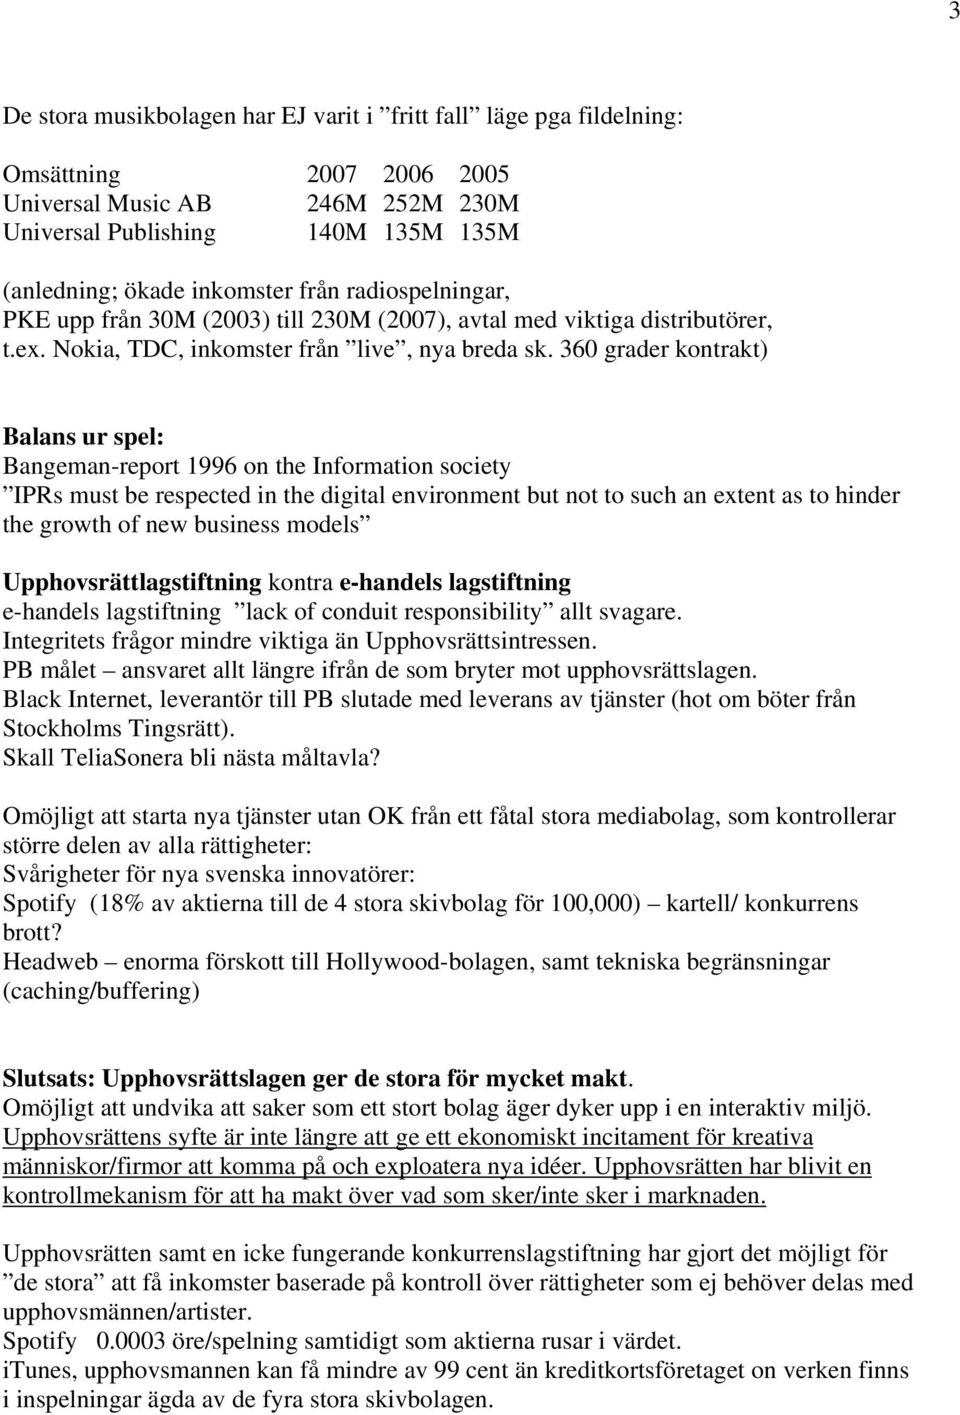 360 grader kontrakt) Balans ur spel: Bangeman-report 1996 on the Information society IPRs must be respected in the digital environment but not to such an extent as to hinder the growth of new